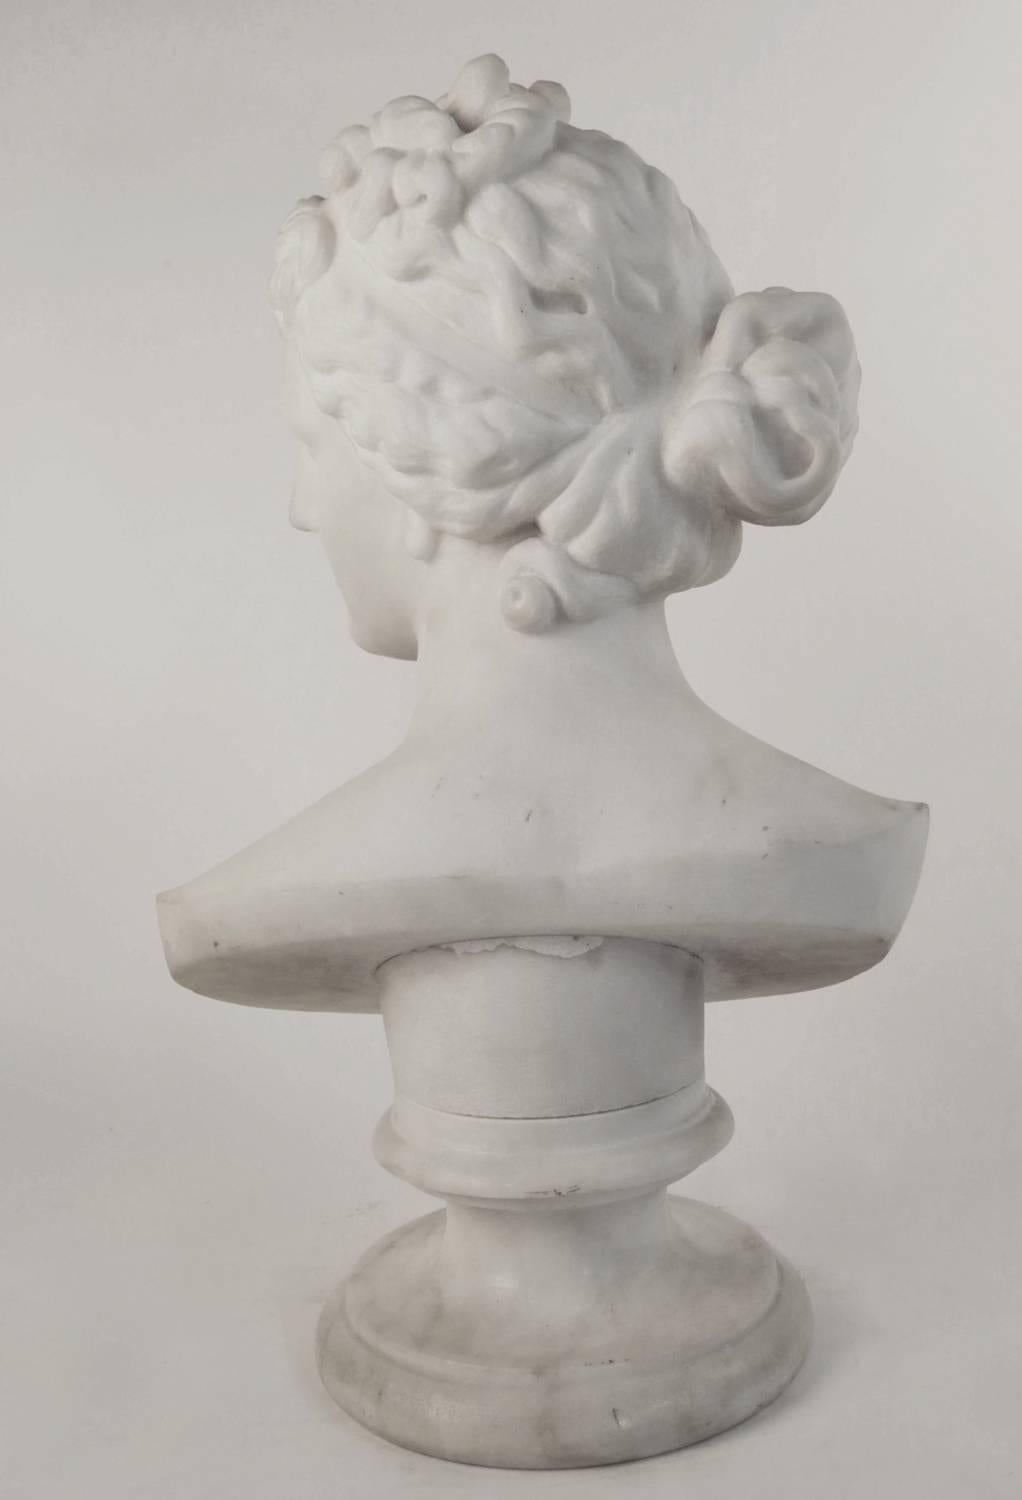 Carved in white Carrara marble, the bust finely modeled and raised on a marble socle.